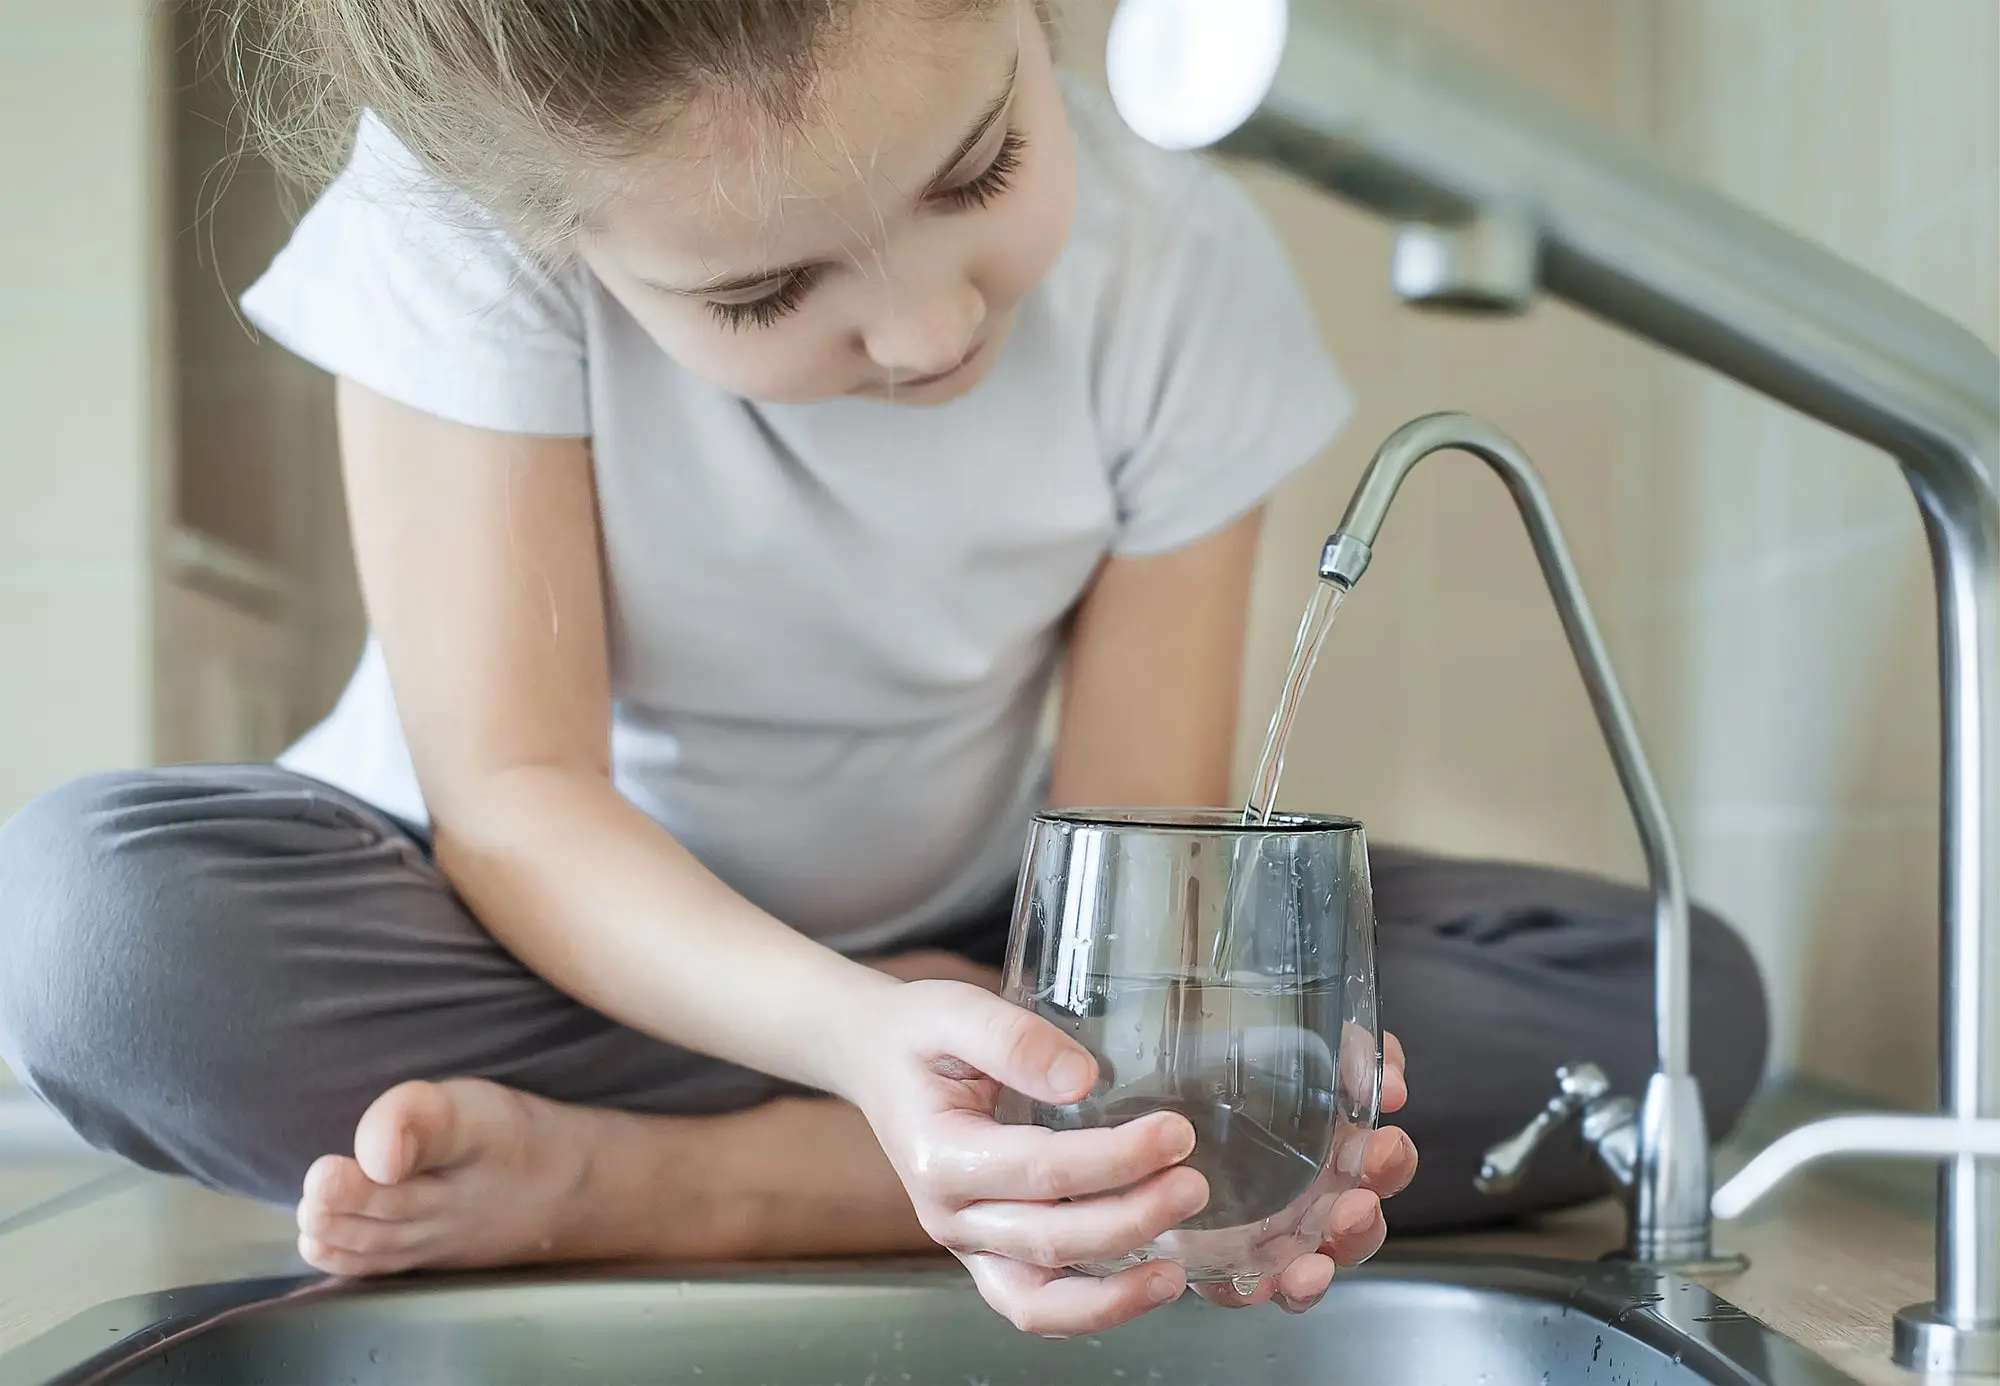 Young girl filling glass of water